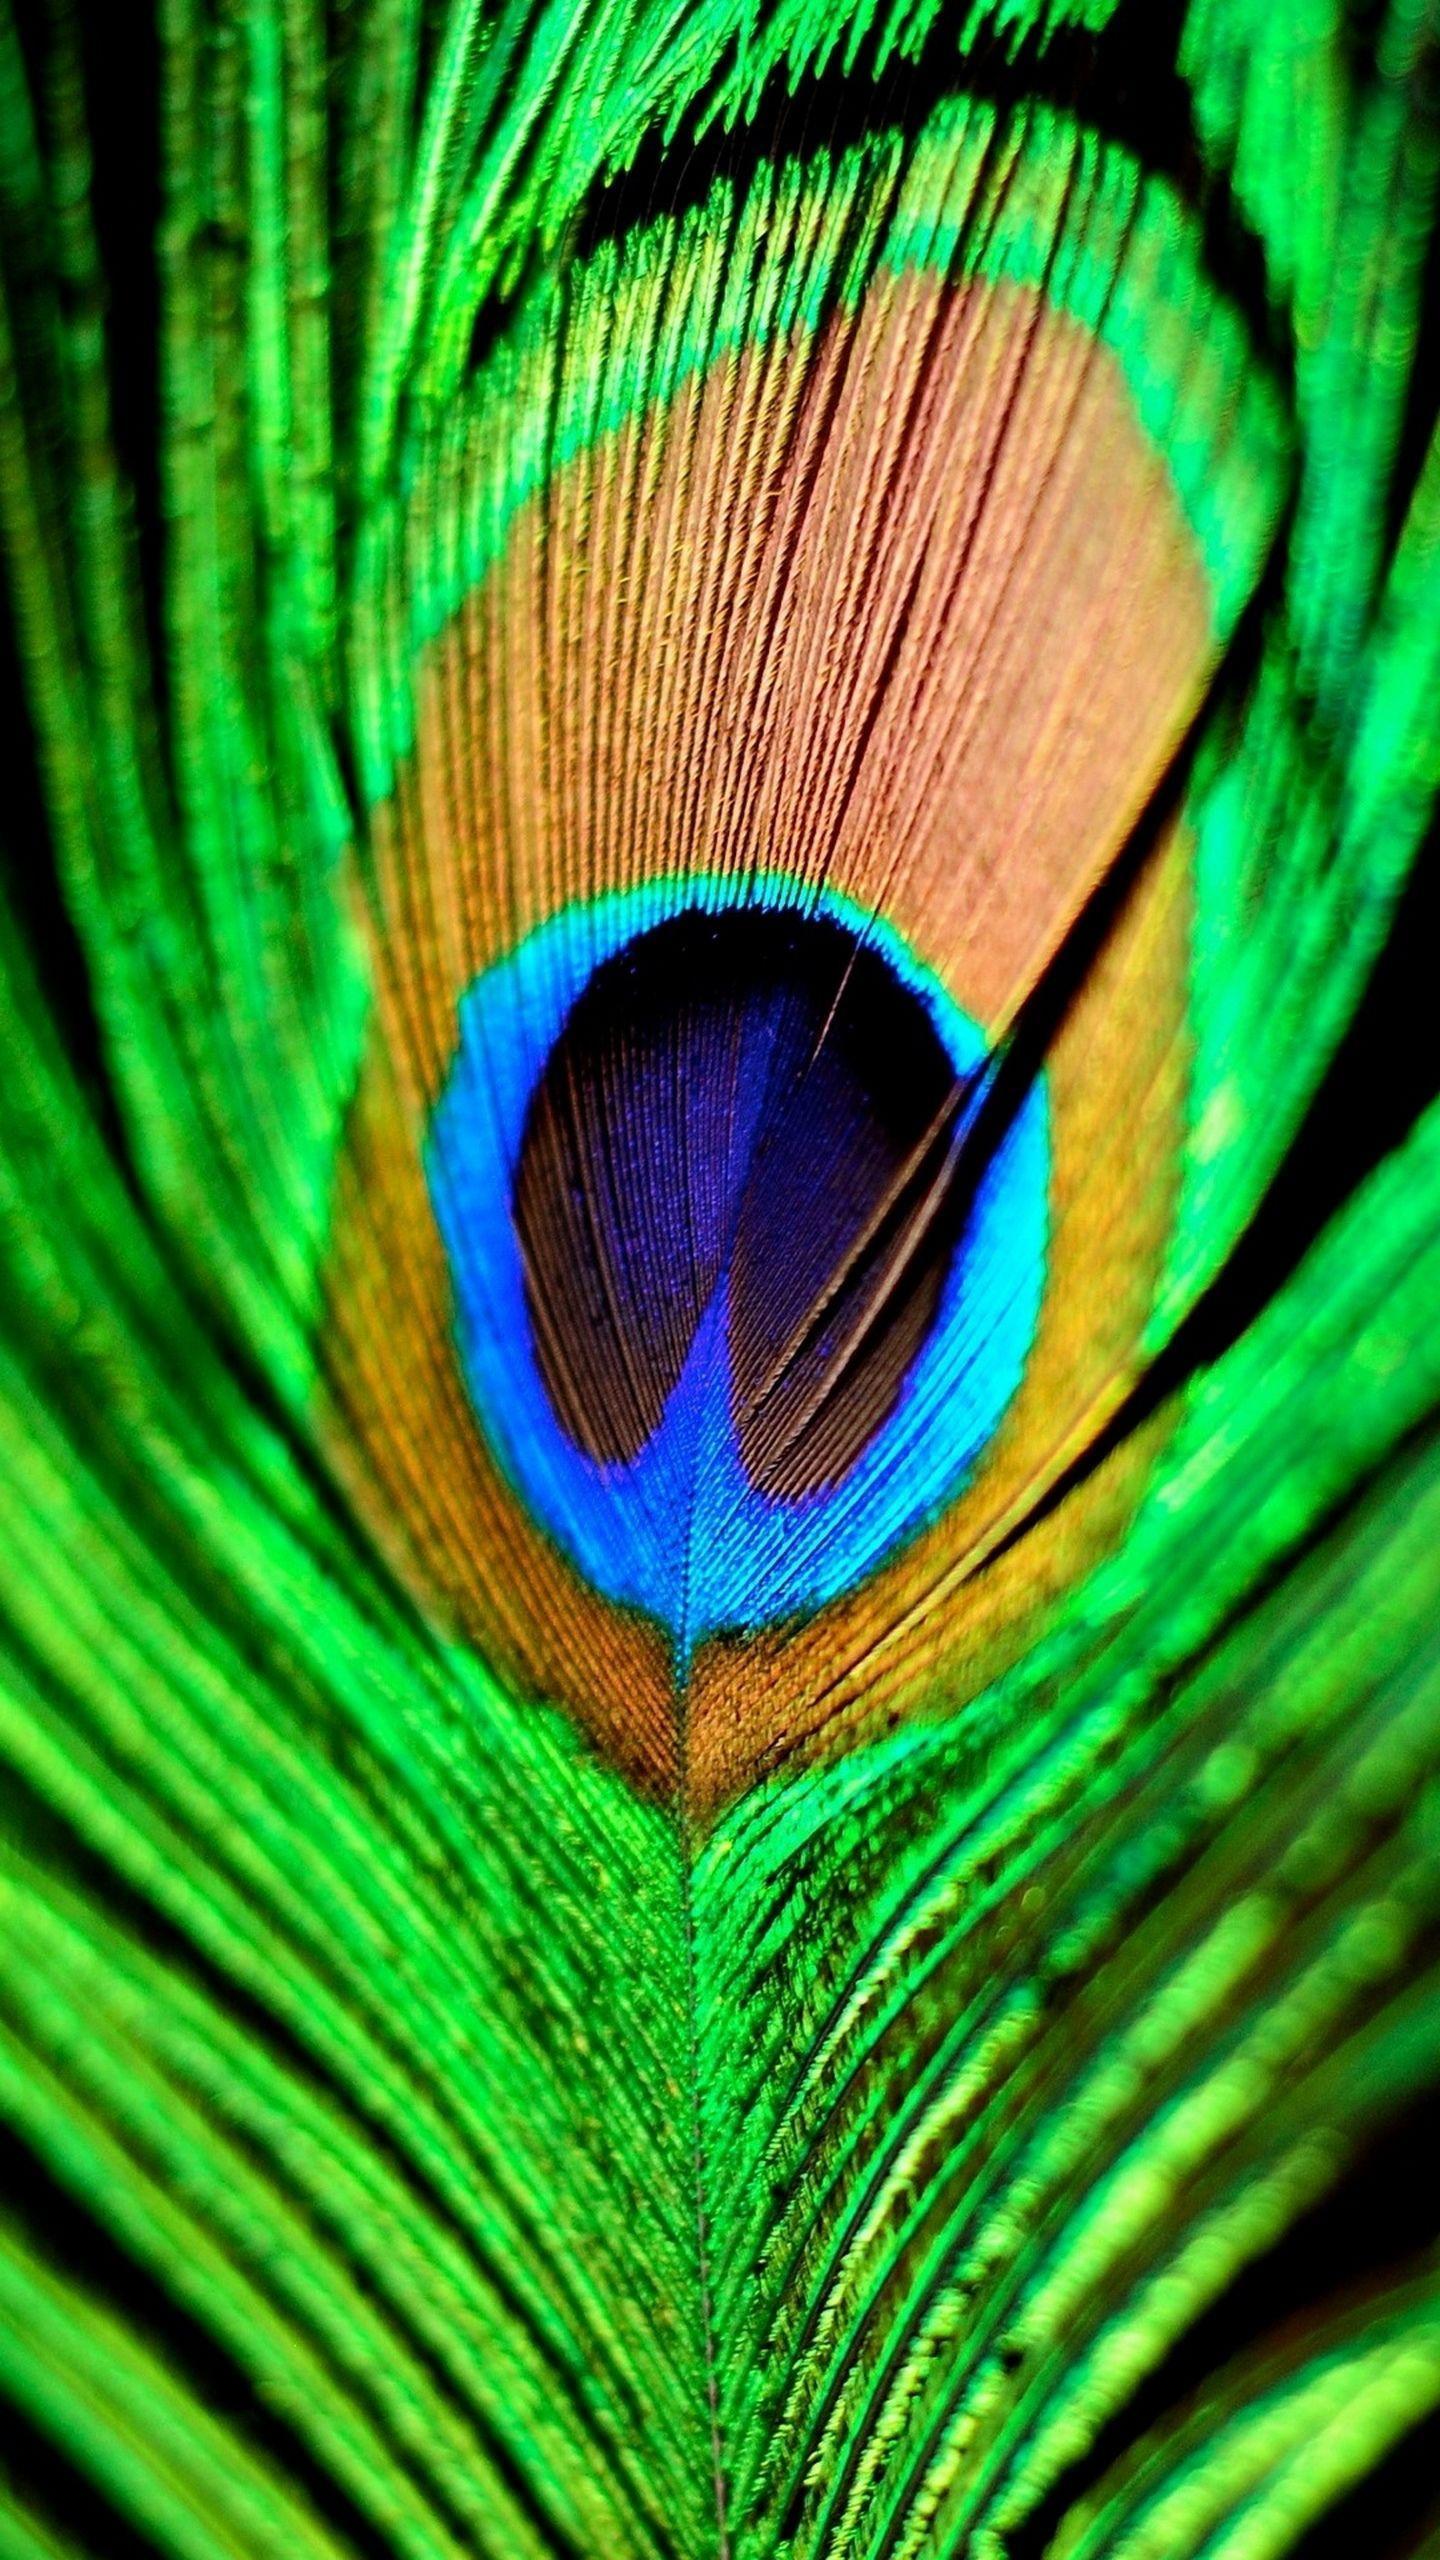 Backgrounds, Peacock feathers and Peacocks